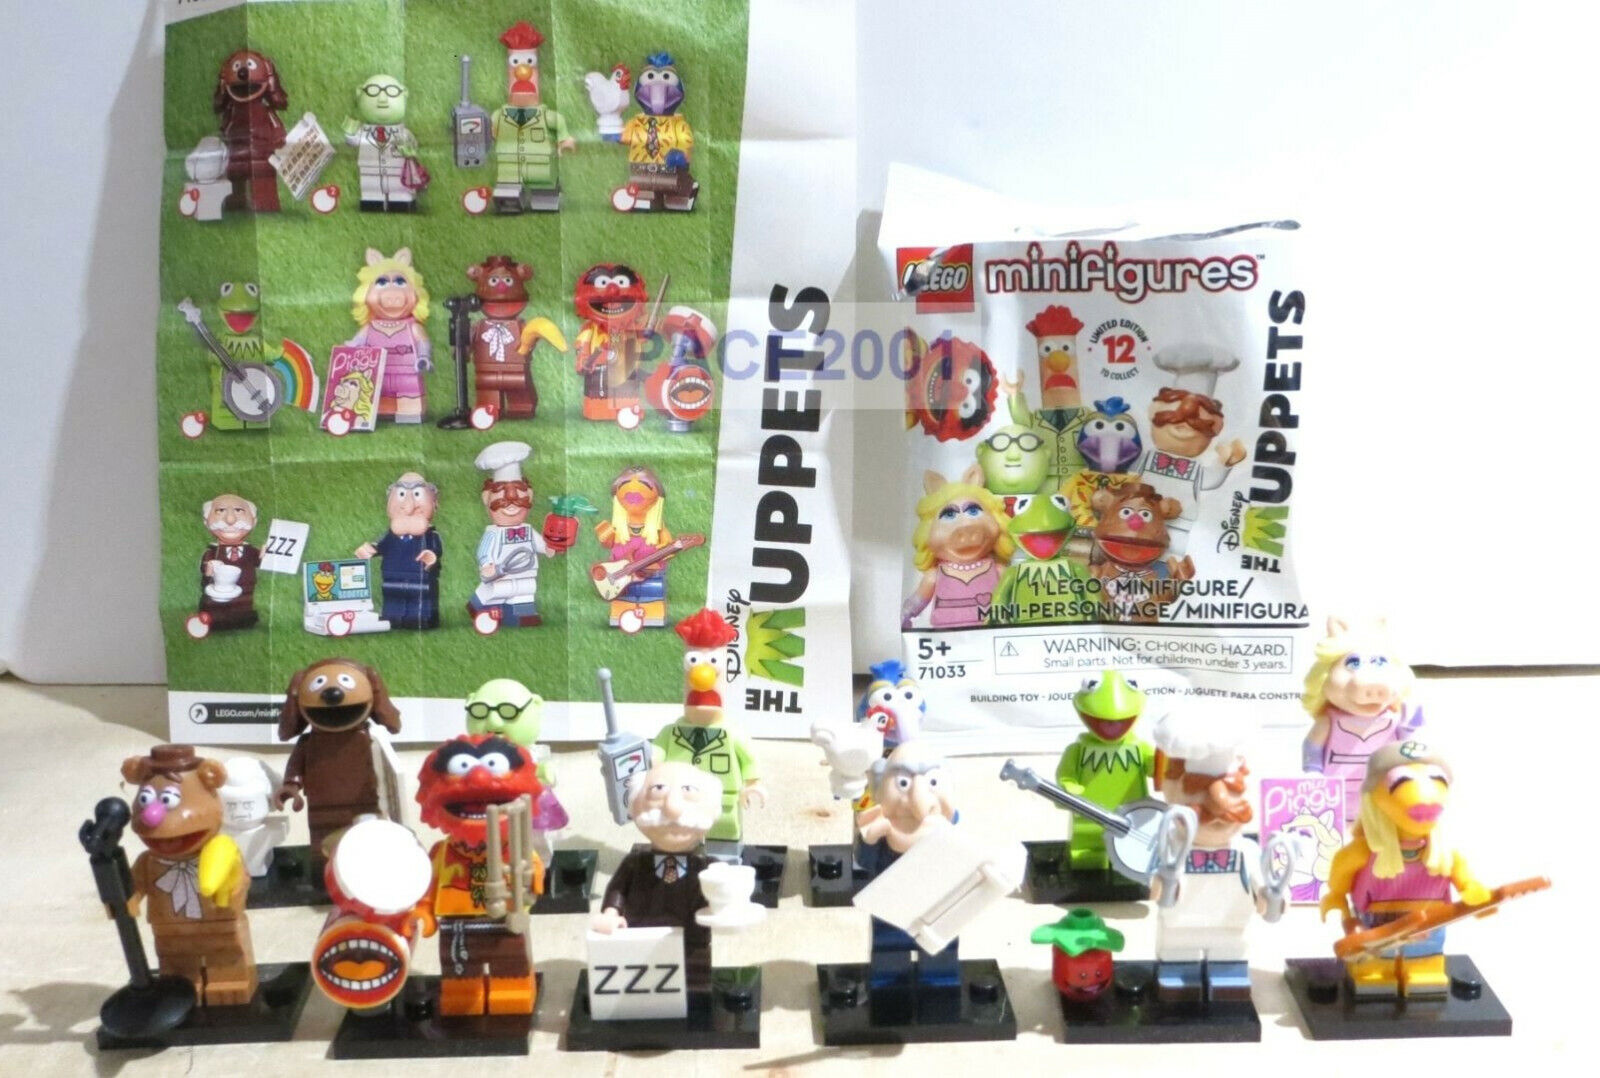 LEGO 71033 The Muppets Minifigures - Complete Set of 12 - 2022 (Kermit, Fozzie..